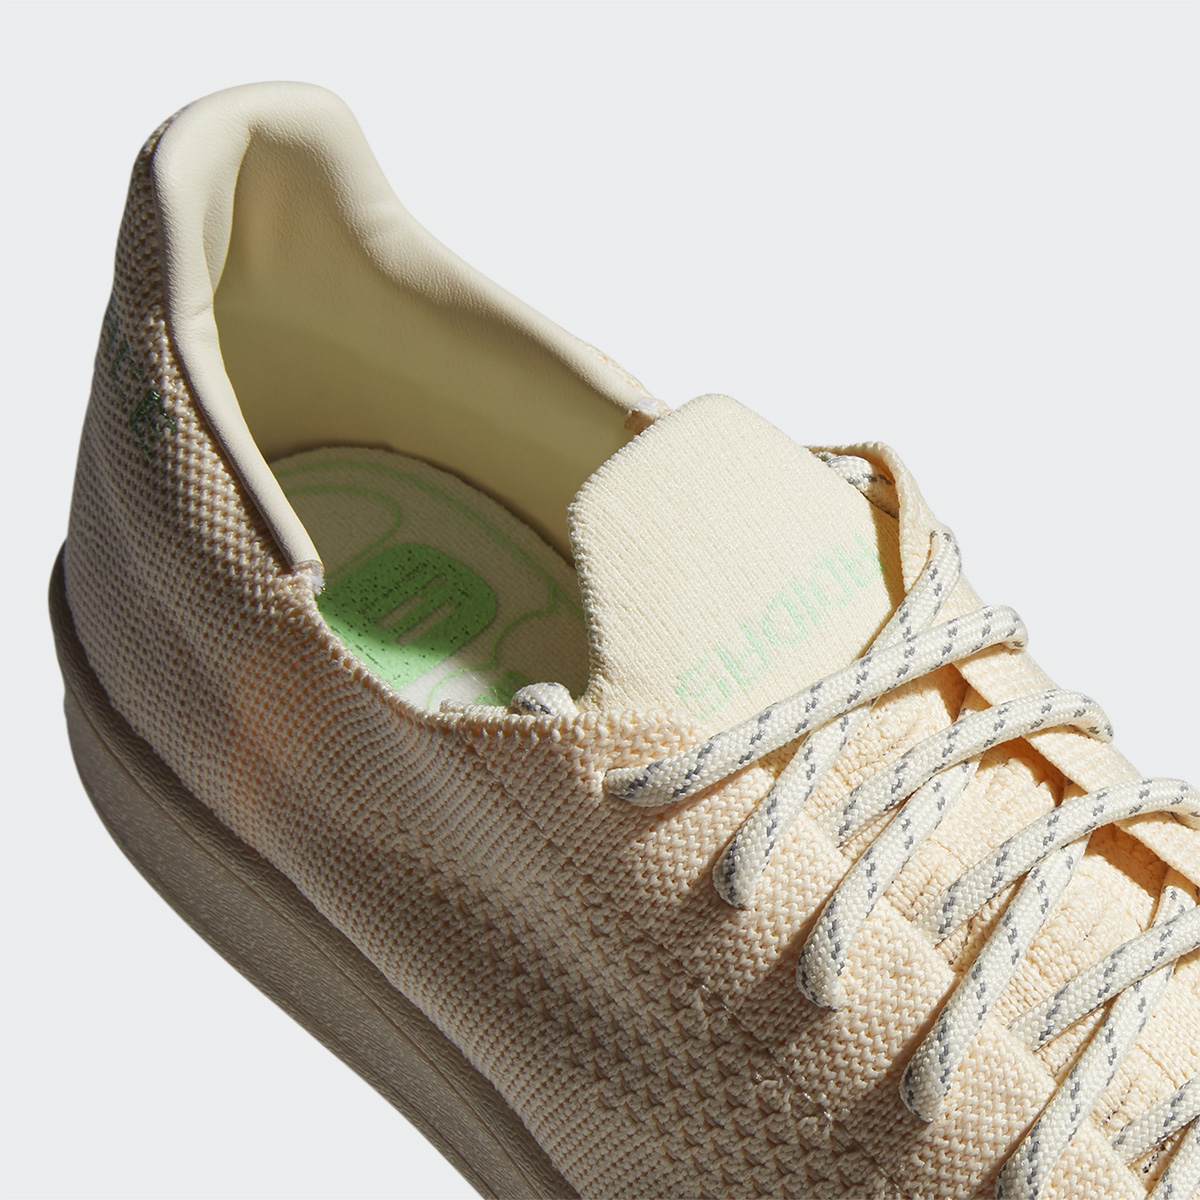 adidas Originals x Pharrell Williams Superstar knitted sneakers in white